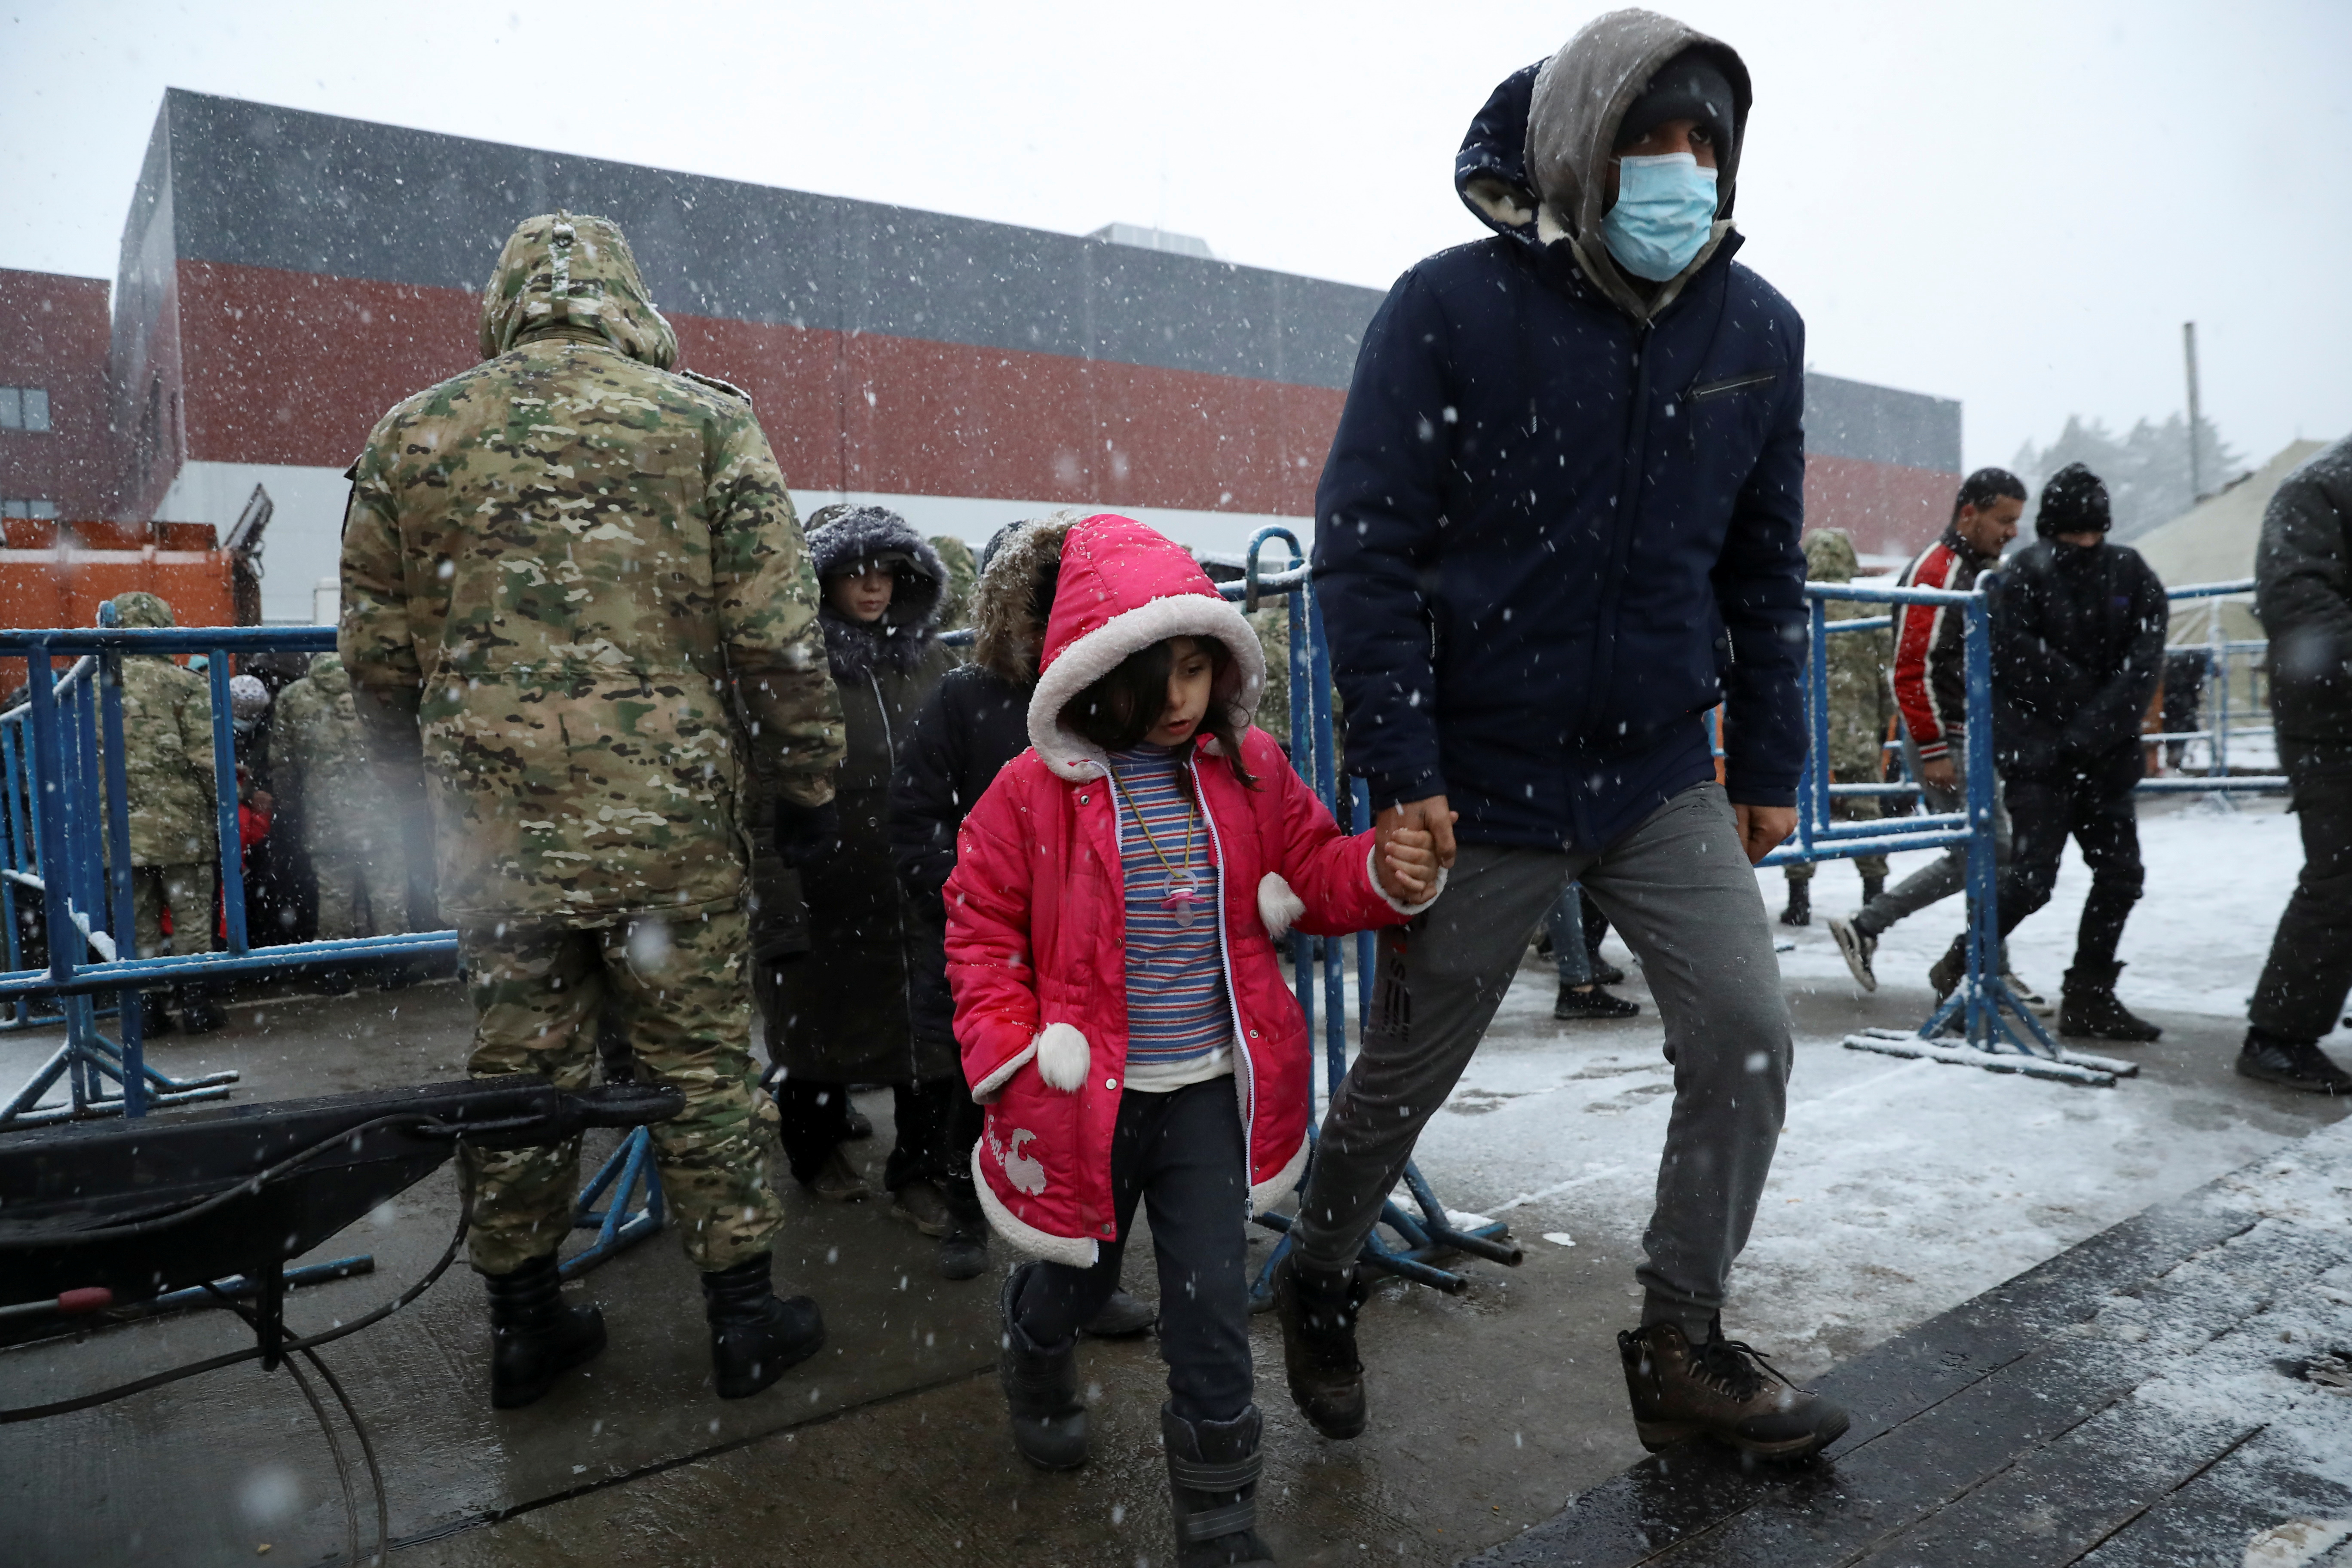 A migrant walks with a child during snowfall, at a transport and logistics centre near the Belarusian-Polish border, in the Grodno region, Belarus November 23, 2021. REUTERS/Kacper Pempel